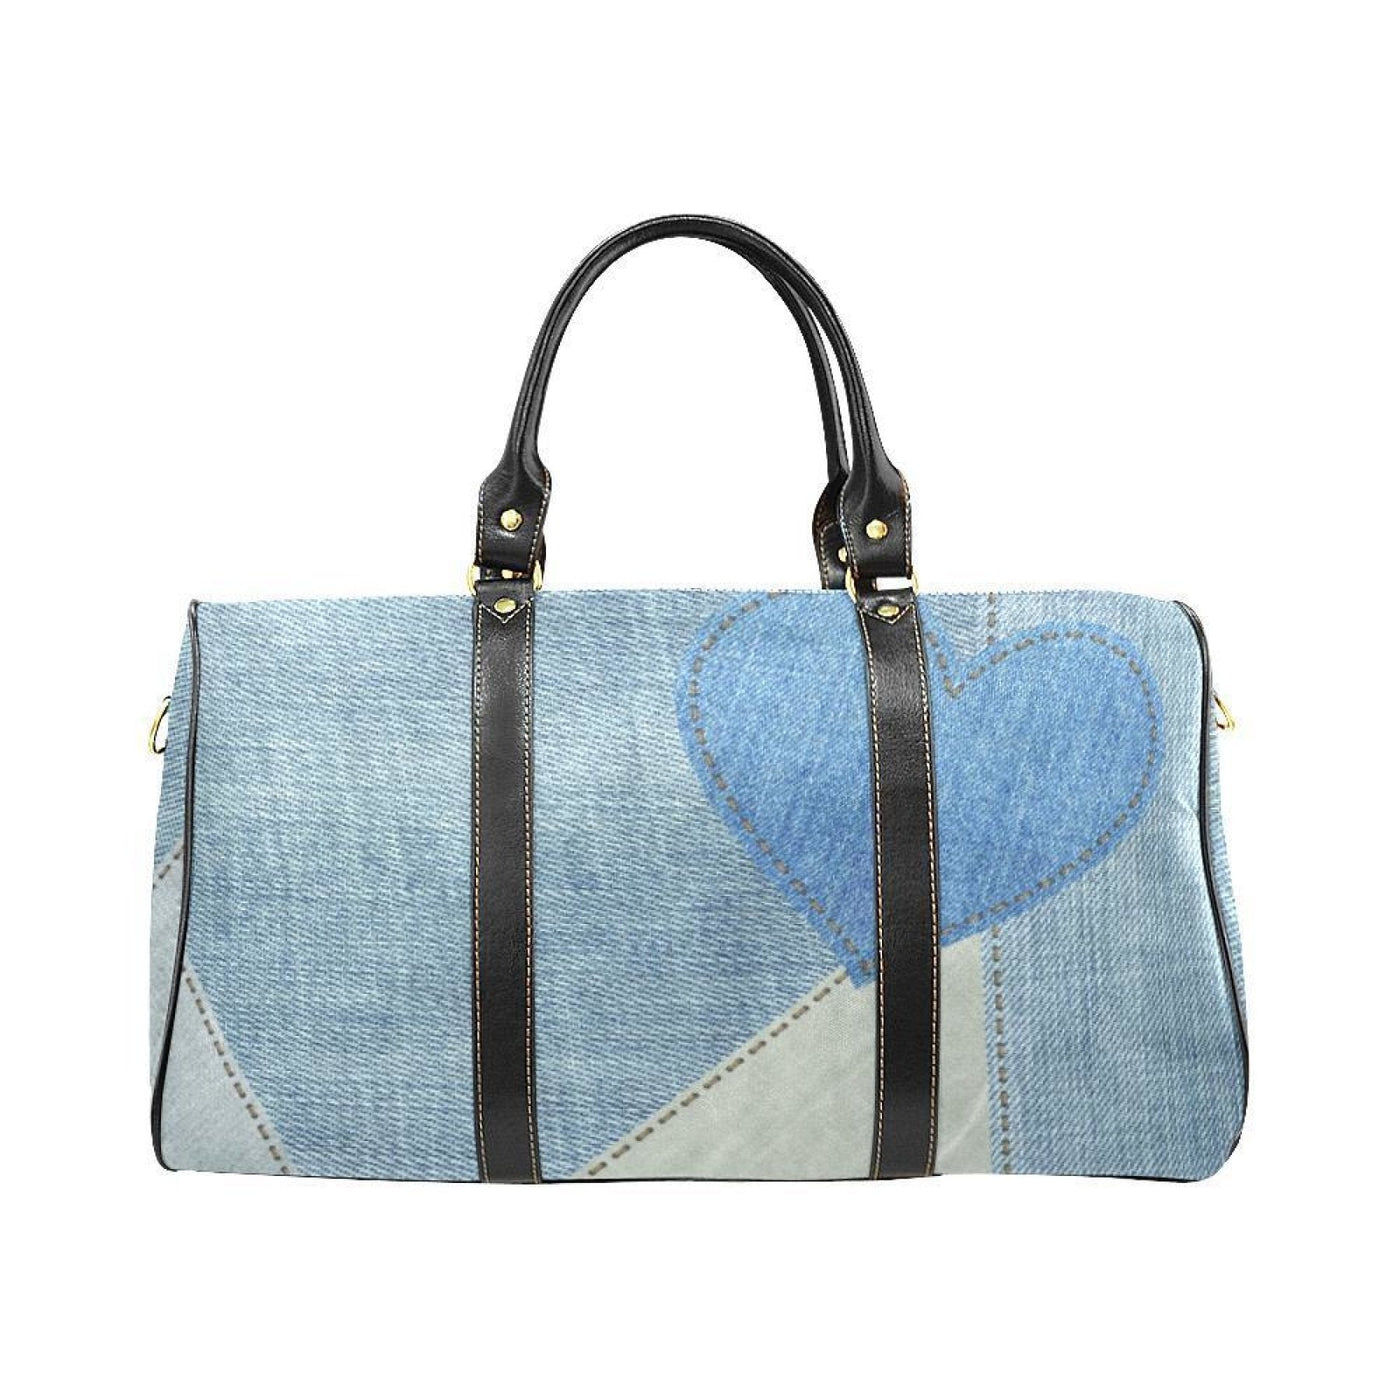 Travel Bag Leather Carry On Large Luggage Bag Blue Denim Heart - Bags | Travel